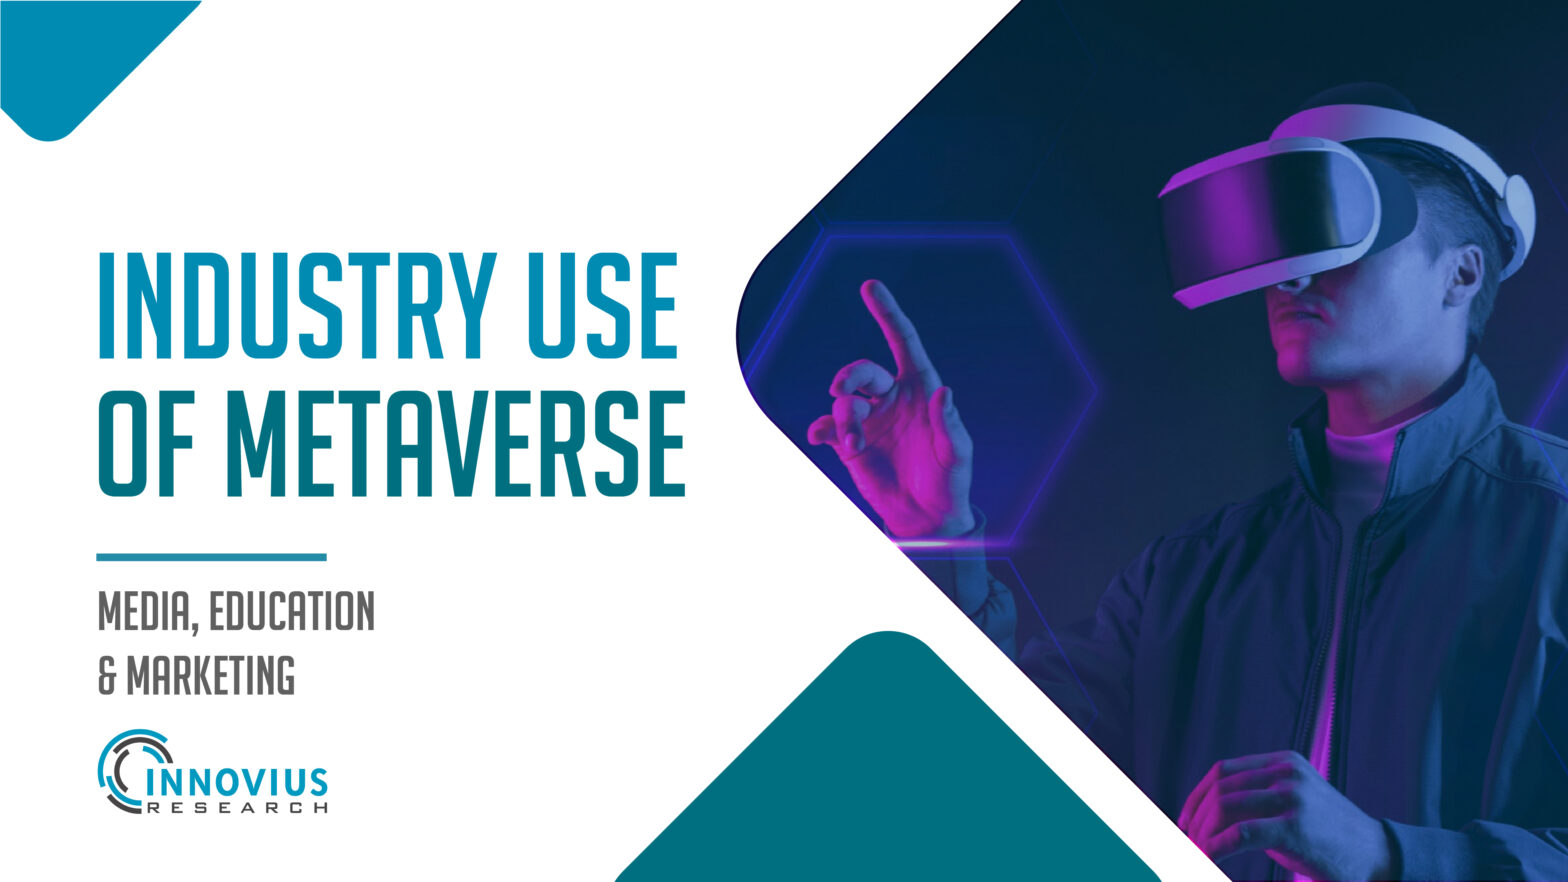 Industry use of Metaverse